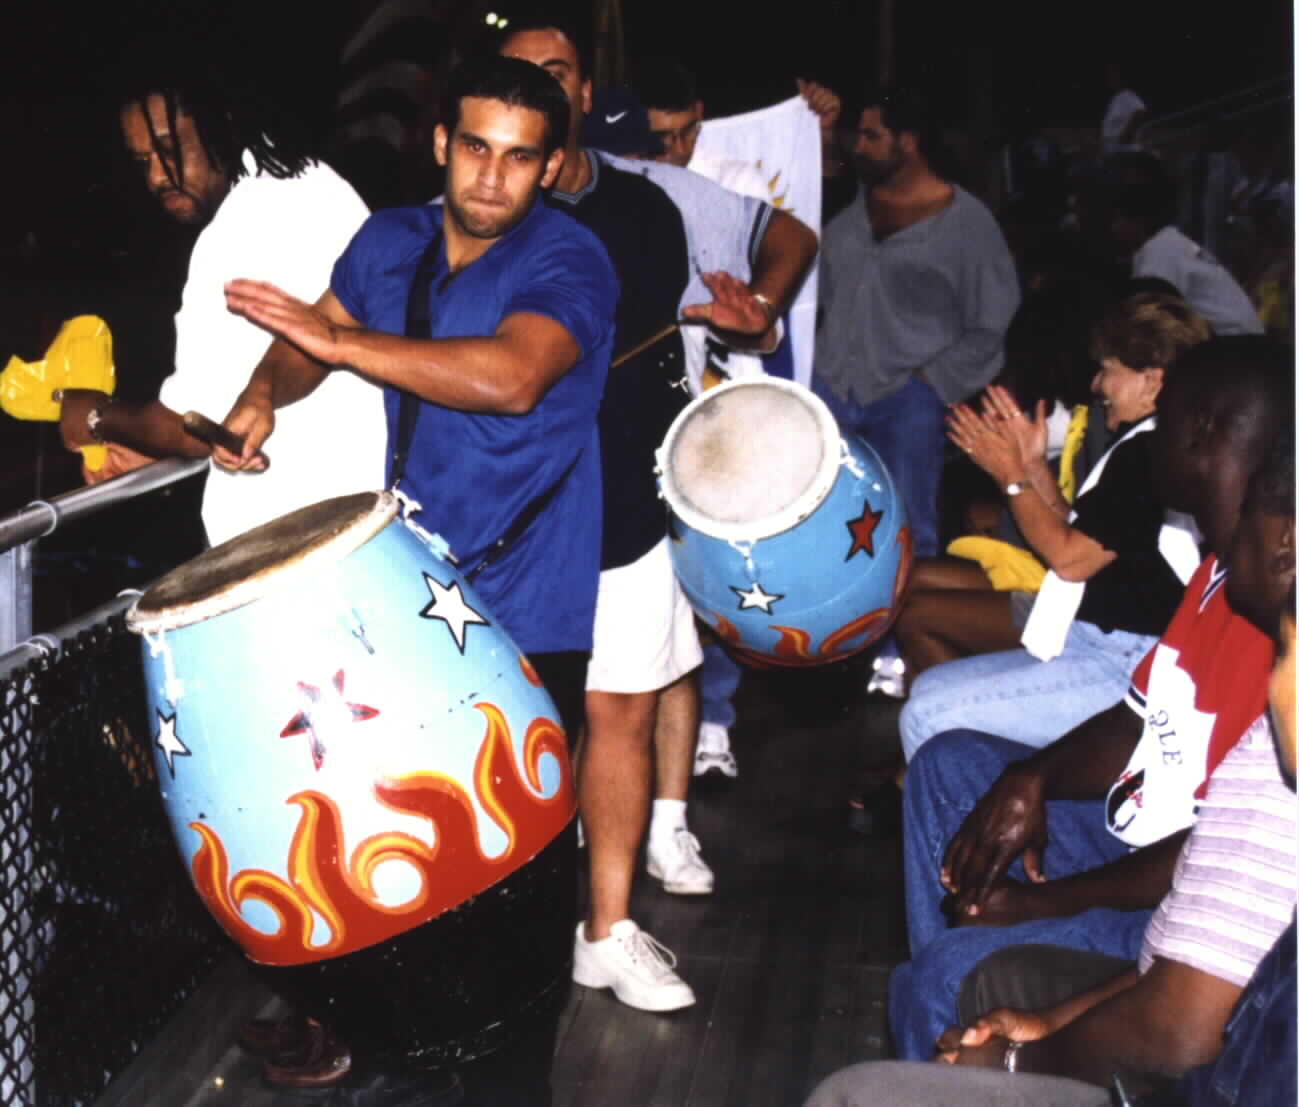 (Uruguay drumers playing all game long.)Picture courtesy of Noe Dorestant... Give credit where credit is due.